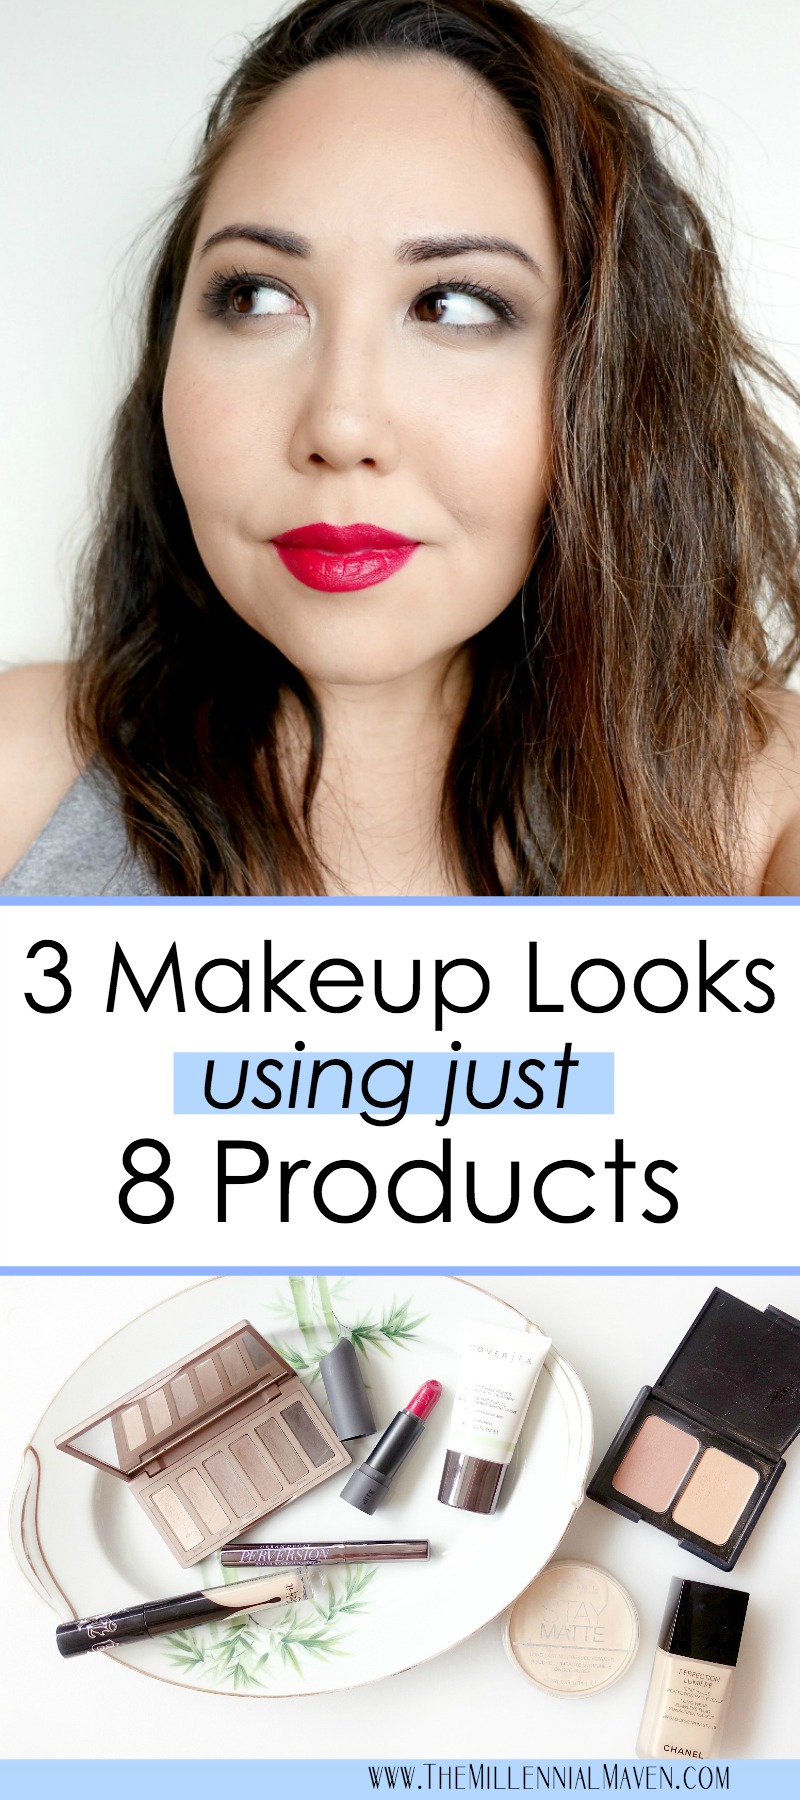 Minimalist Makeup: How to Create *3 Gorgeous Makeup Looks with only 8 Products!